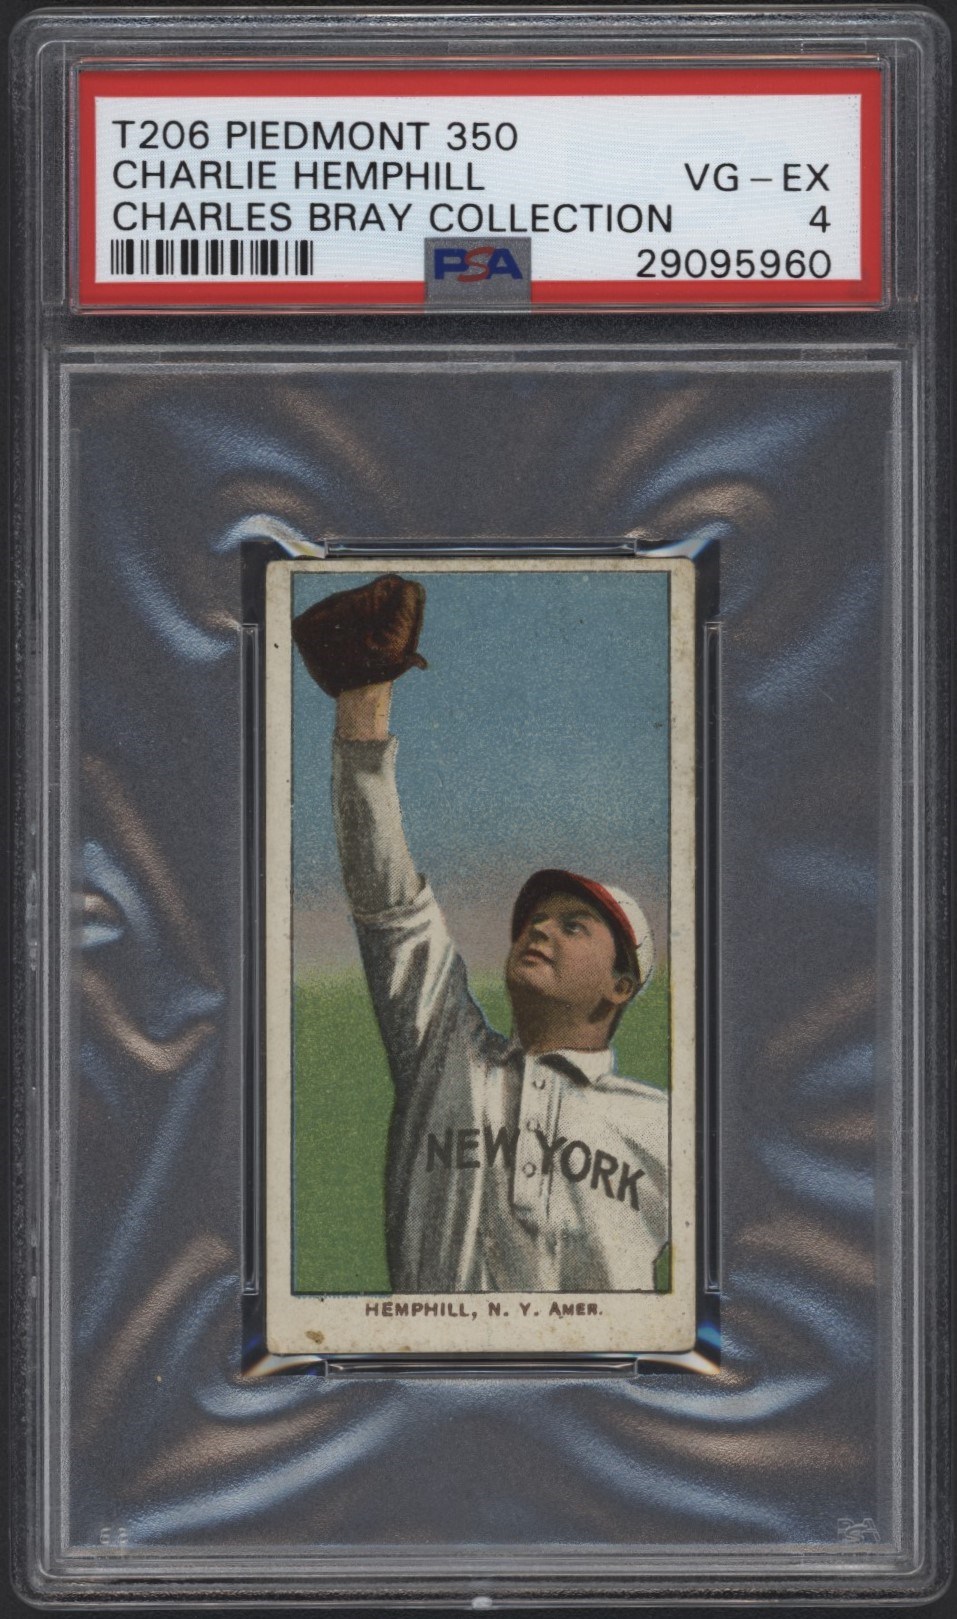 T206 Piedmont 350 Charlie Hemphill PSA 4 From the Charles Bray Collection